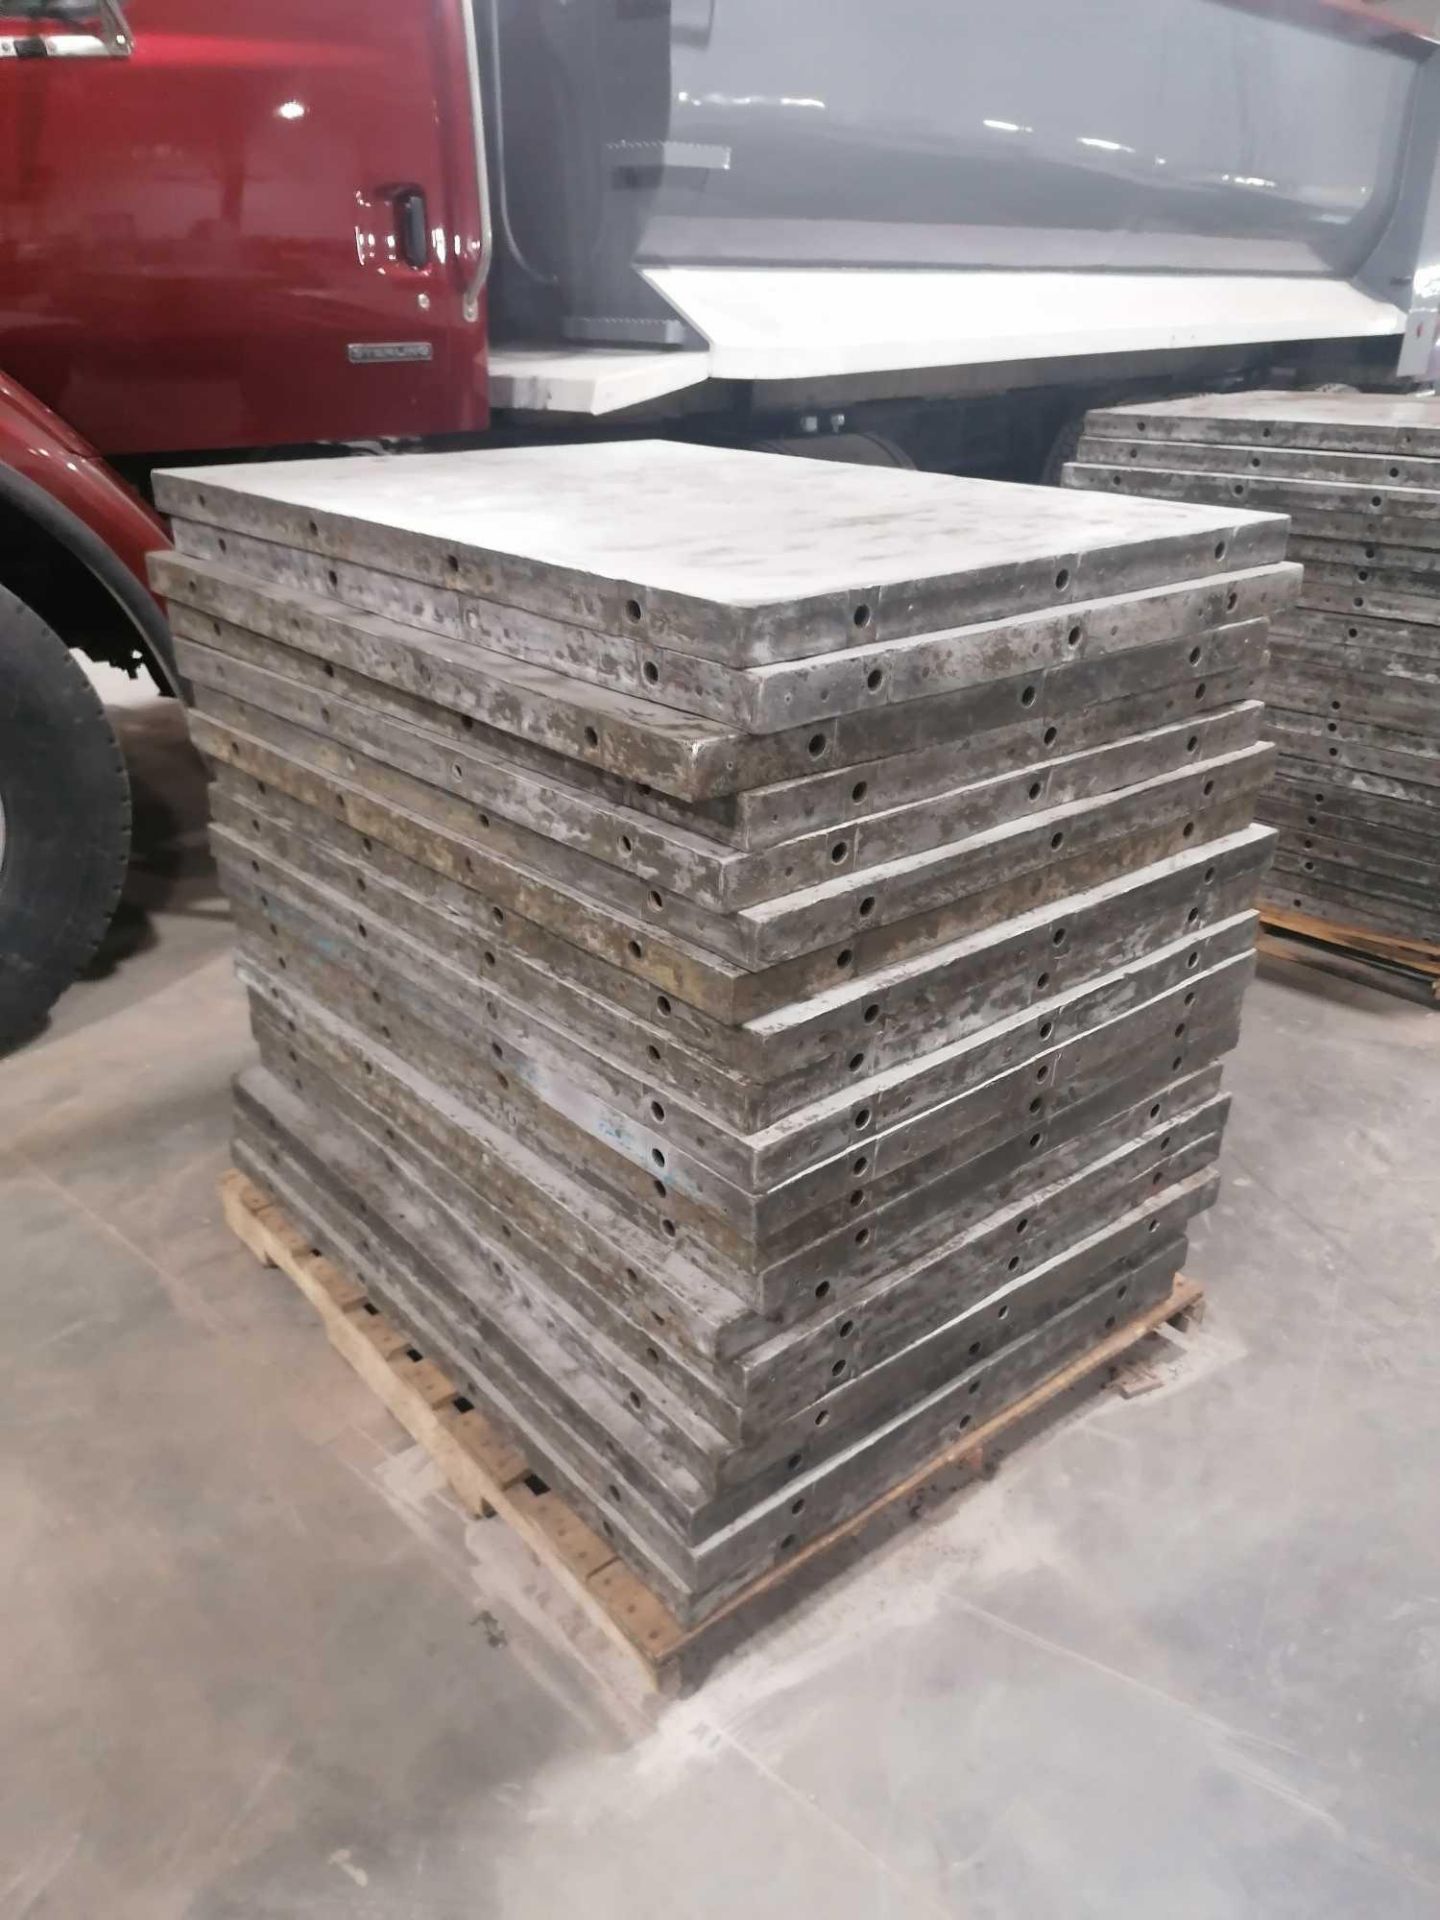 (20) 36" x 4' Western Aluminum Concrete Forms, Smooth 6-12 Hole Pattern. Located at 119 Spruce